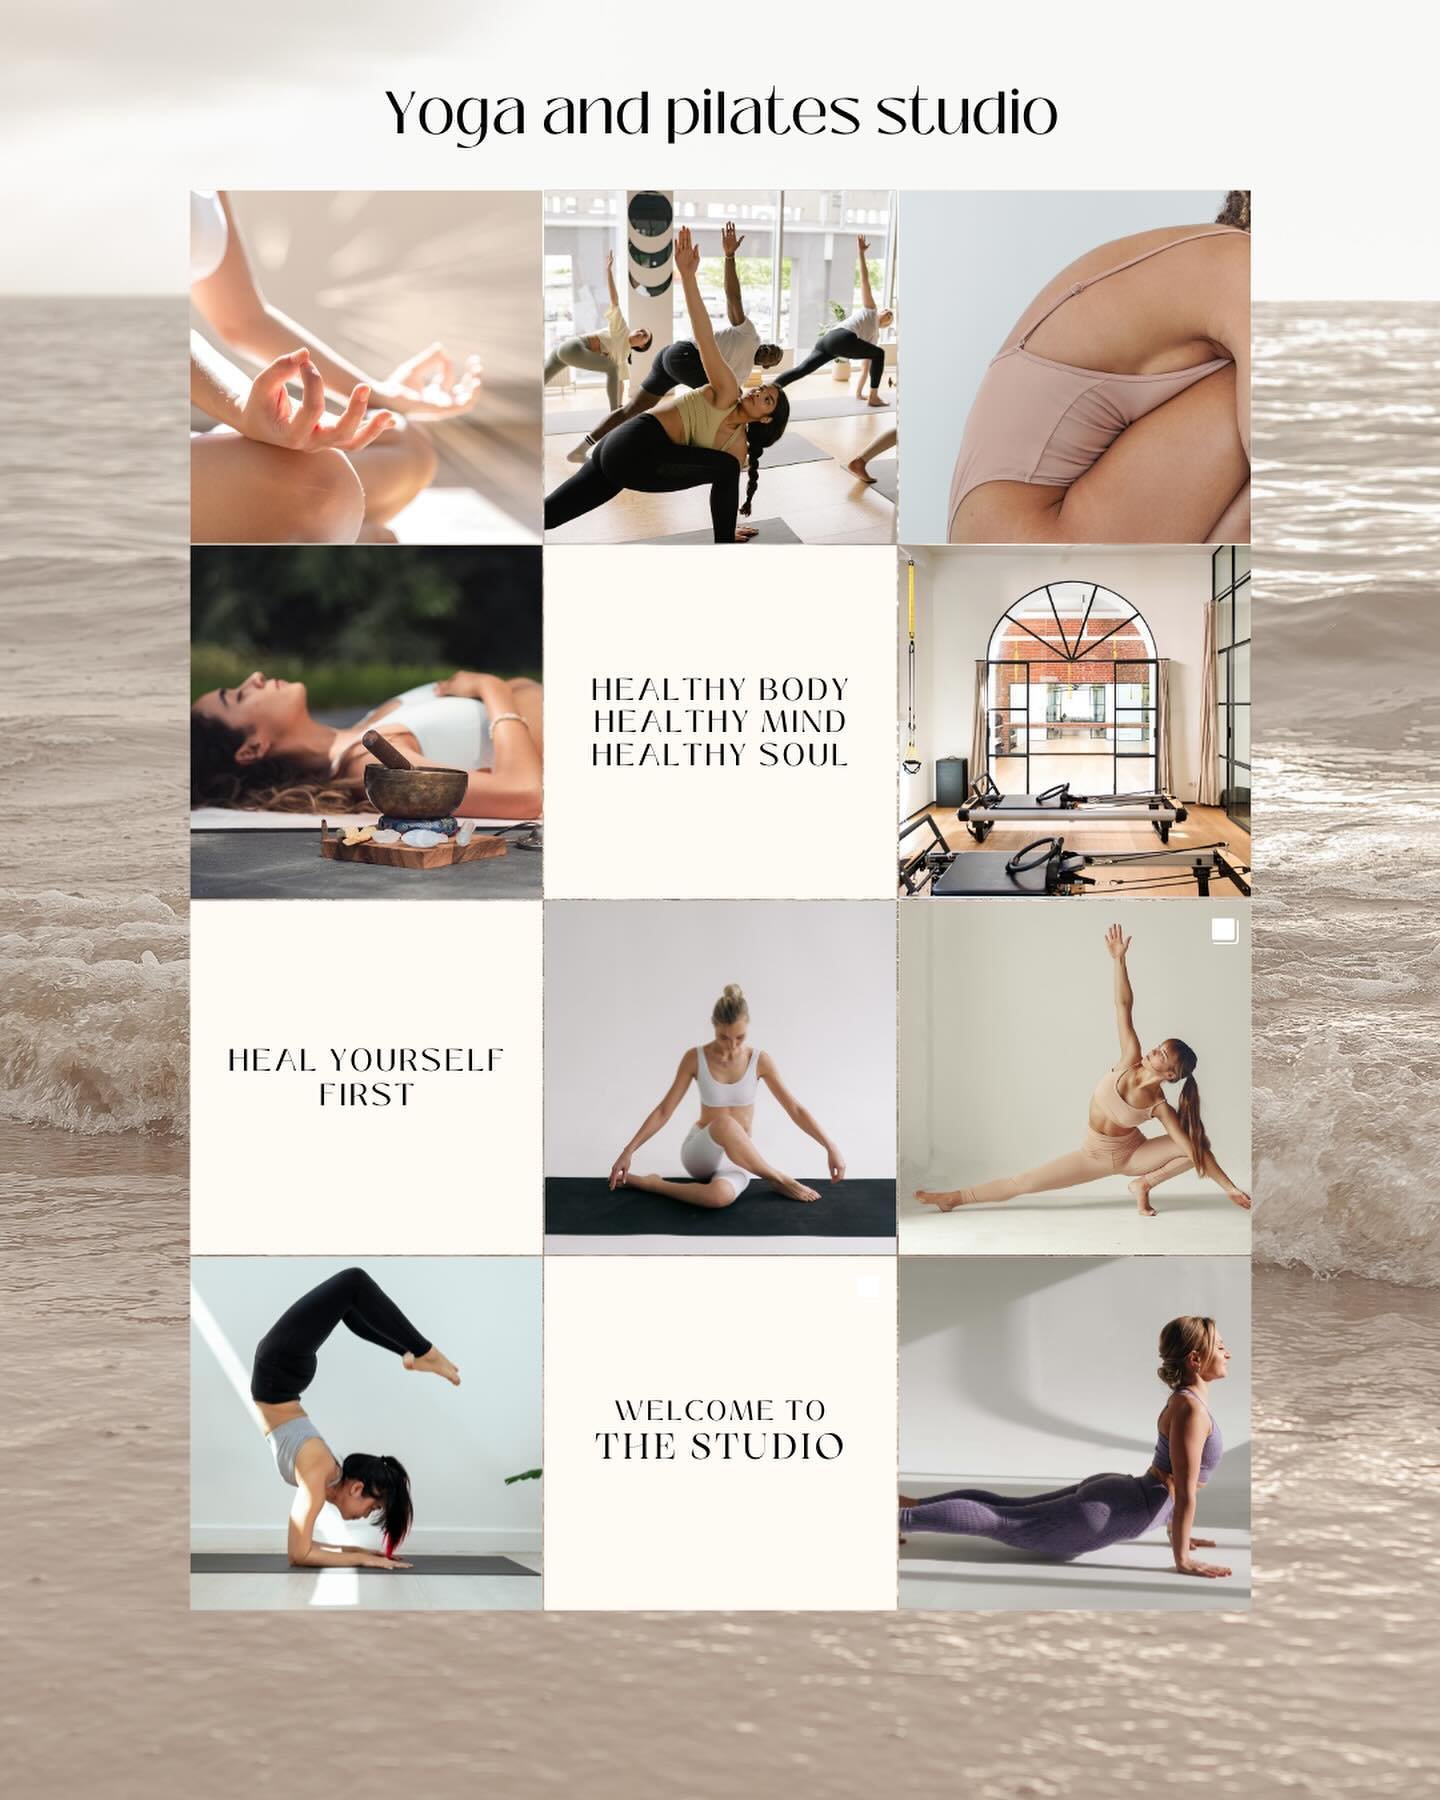 Content ideas for a pilates/yoga studio &darr; 🧘&zwj;♀️

~ show off your studio and its features
~ film day in the life 
~ your top wellbeing tip 
~ the benefits of each type of class you offer
~ meet the team
~ client testimonials 
~ your business 